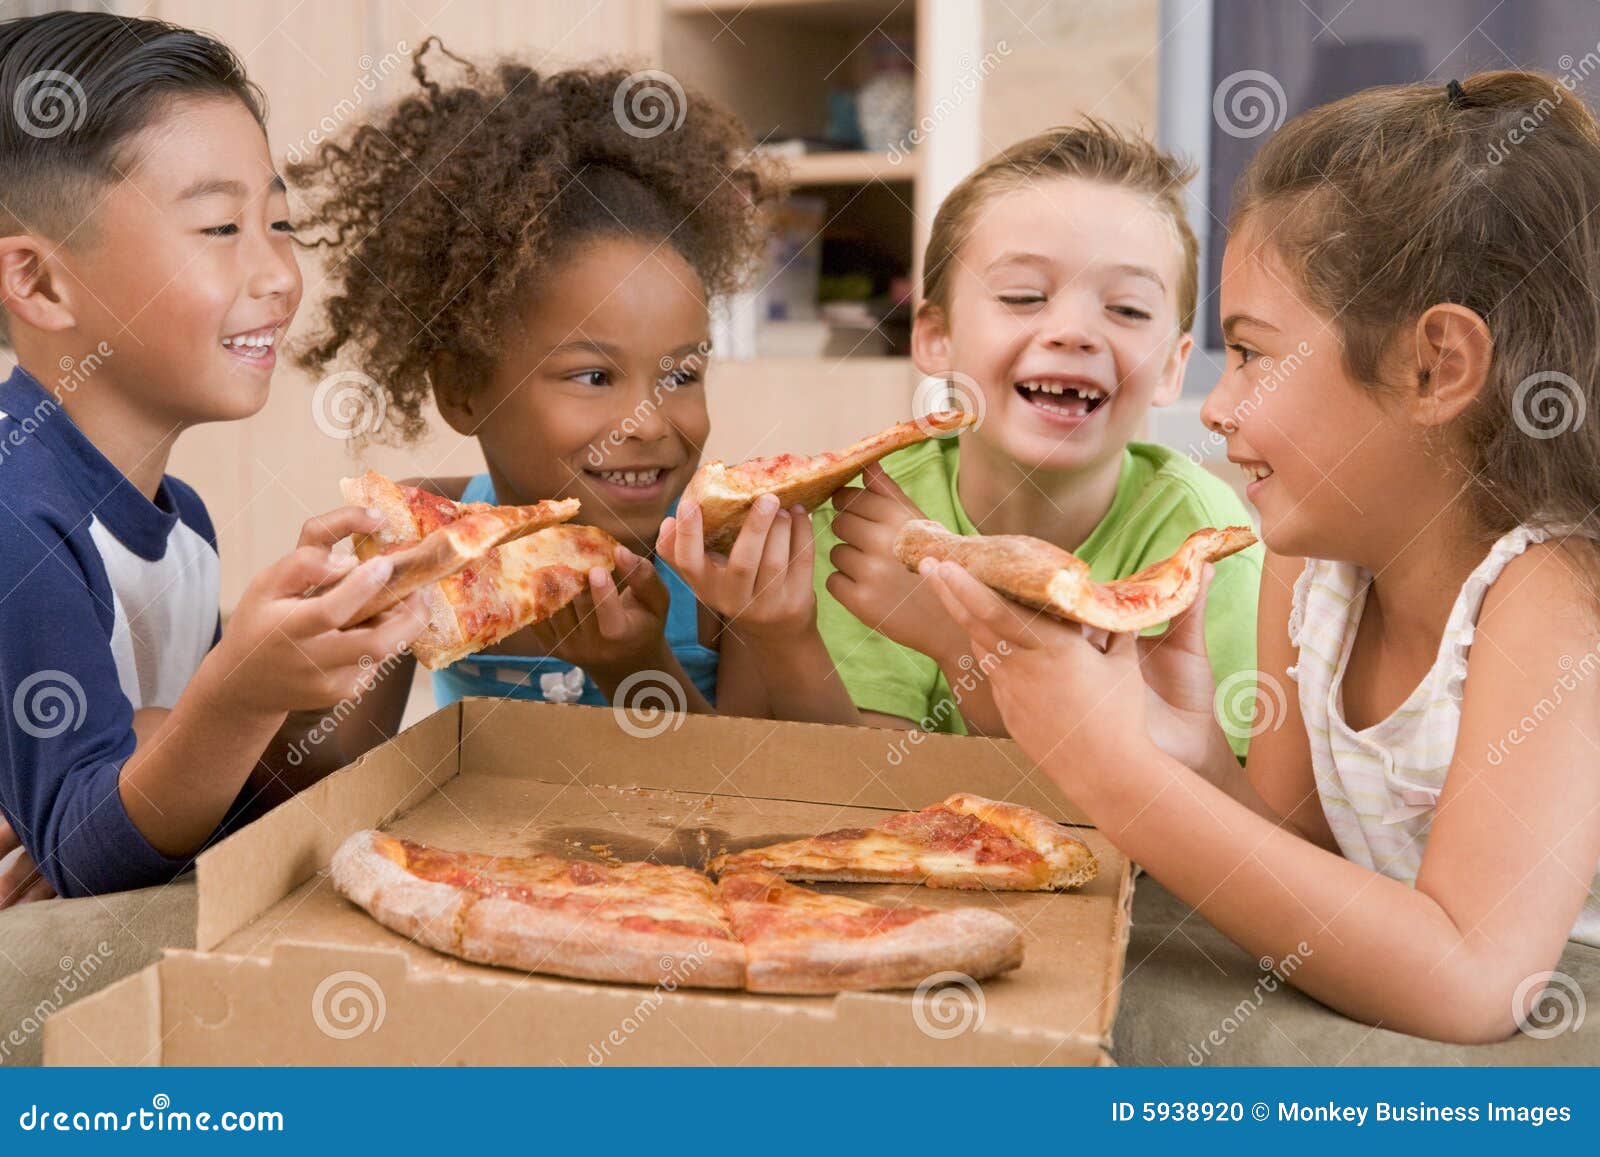 four young children indoors eating pizza